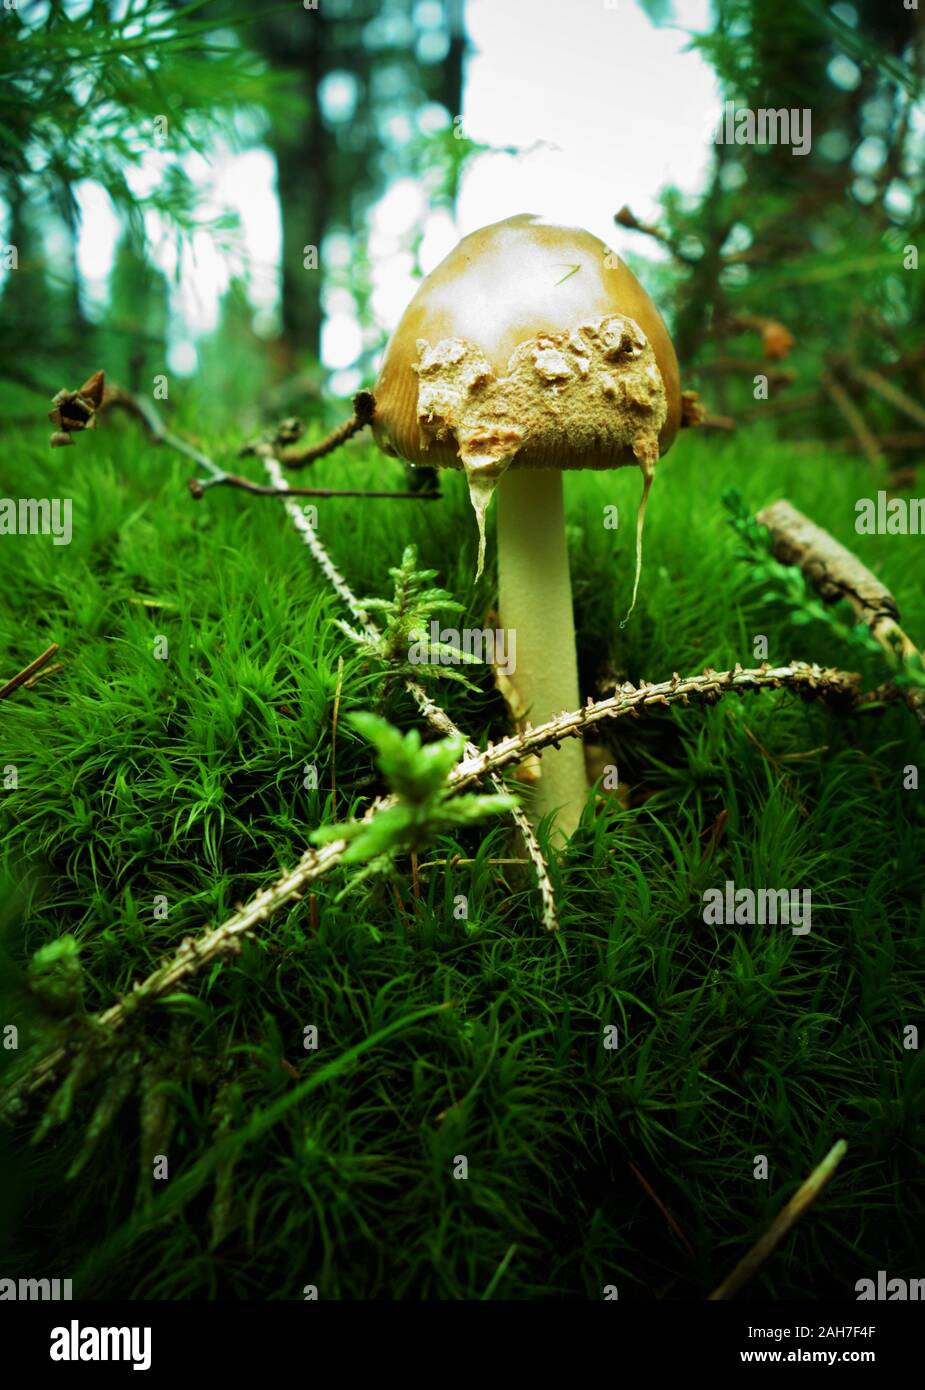 Mushroom with brown cap and white stem Stock Photo